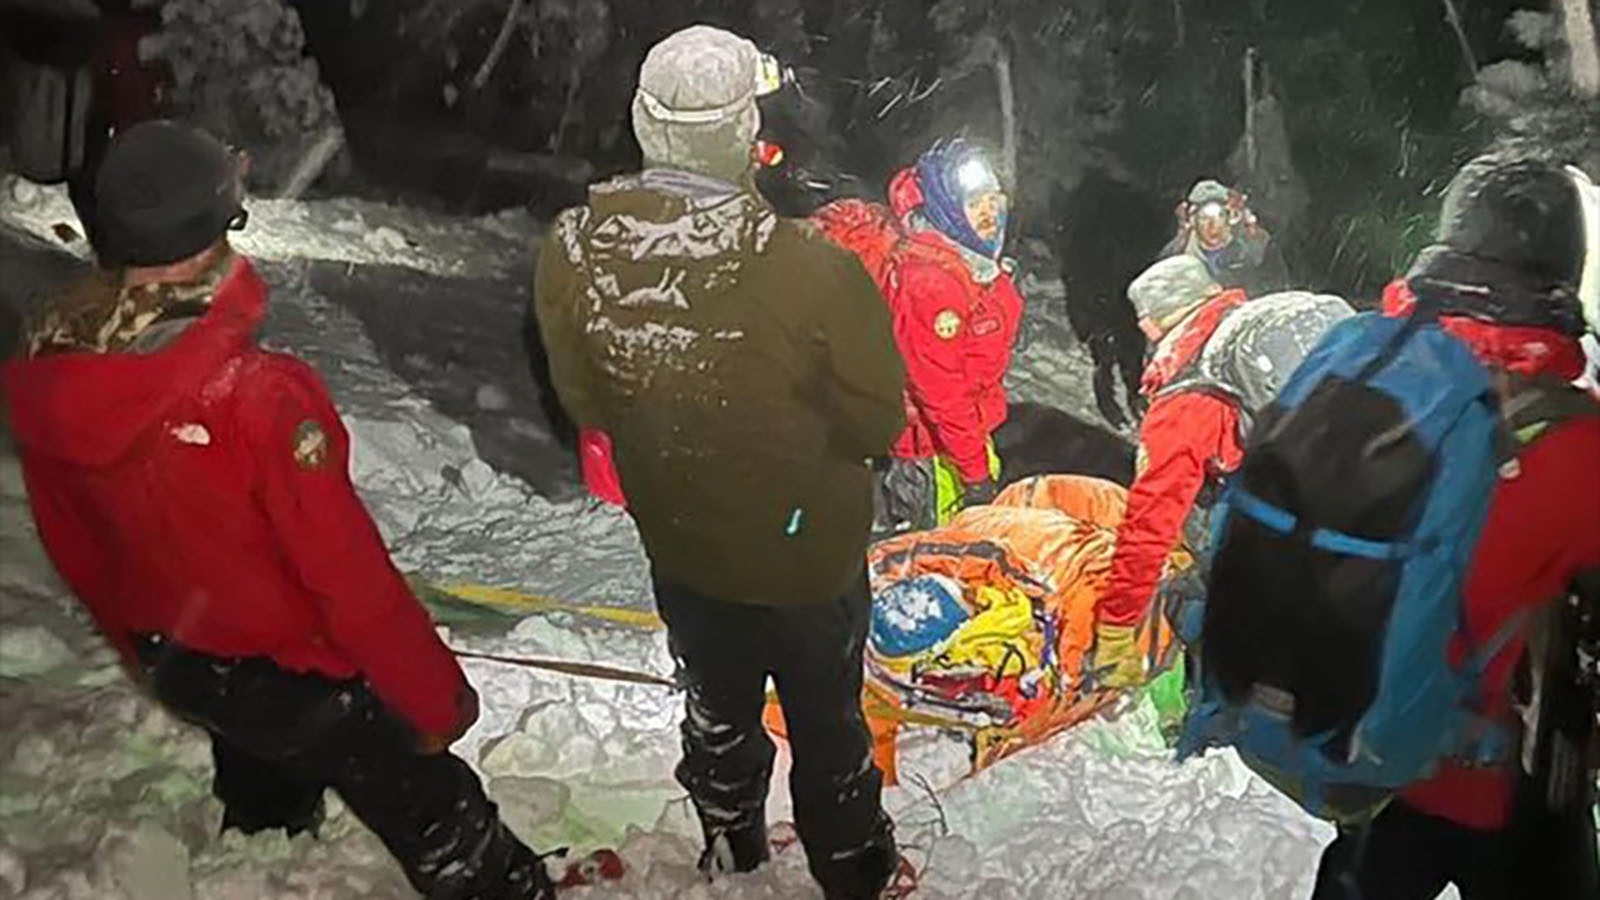 Responders with Teton County Idaho Search and Rescue bring Travis Halverson off the mountain after he was caught in an avalanche skiing in the backcountry on Jan. 12, 2024.